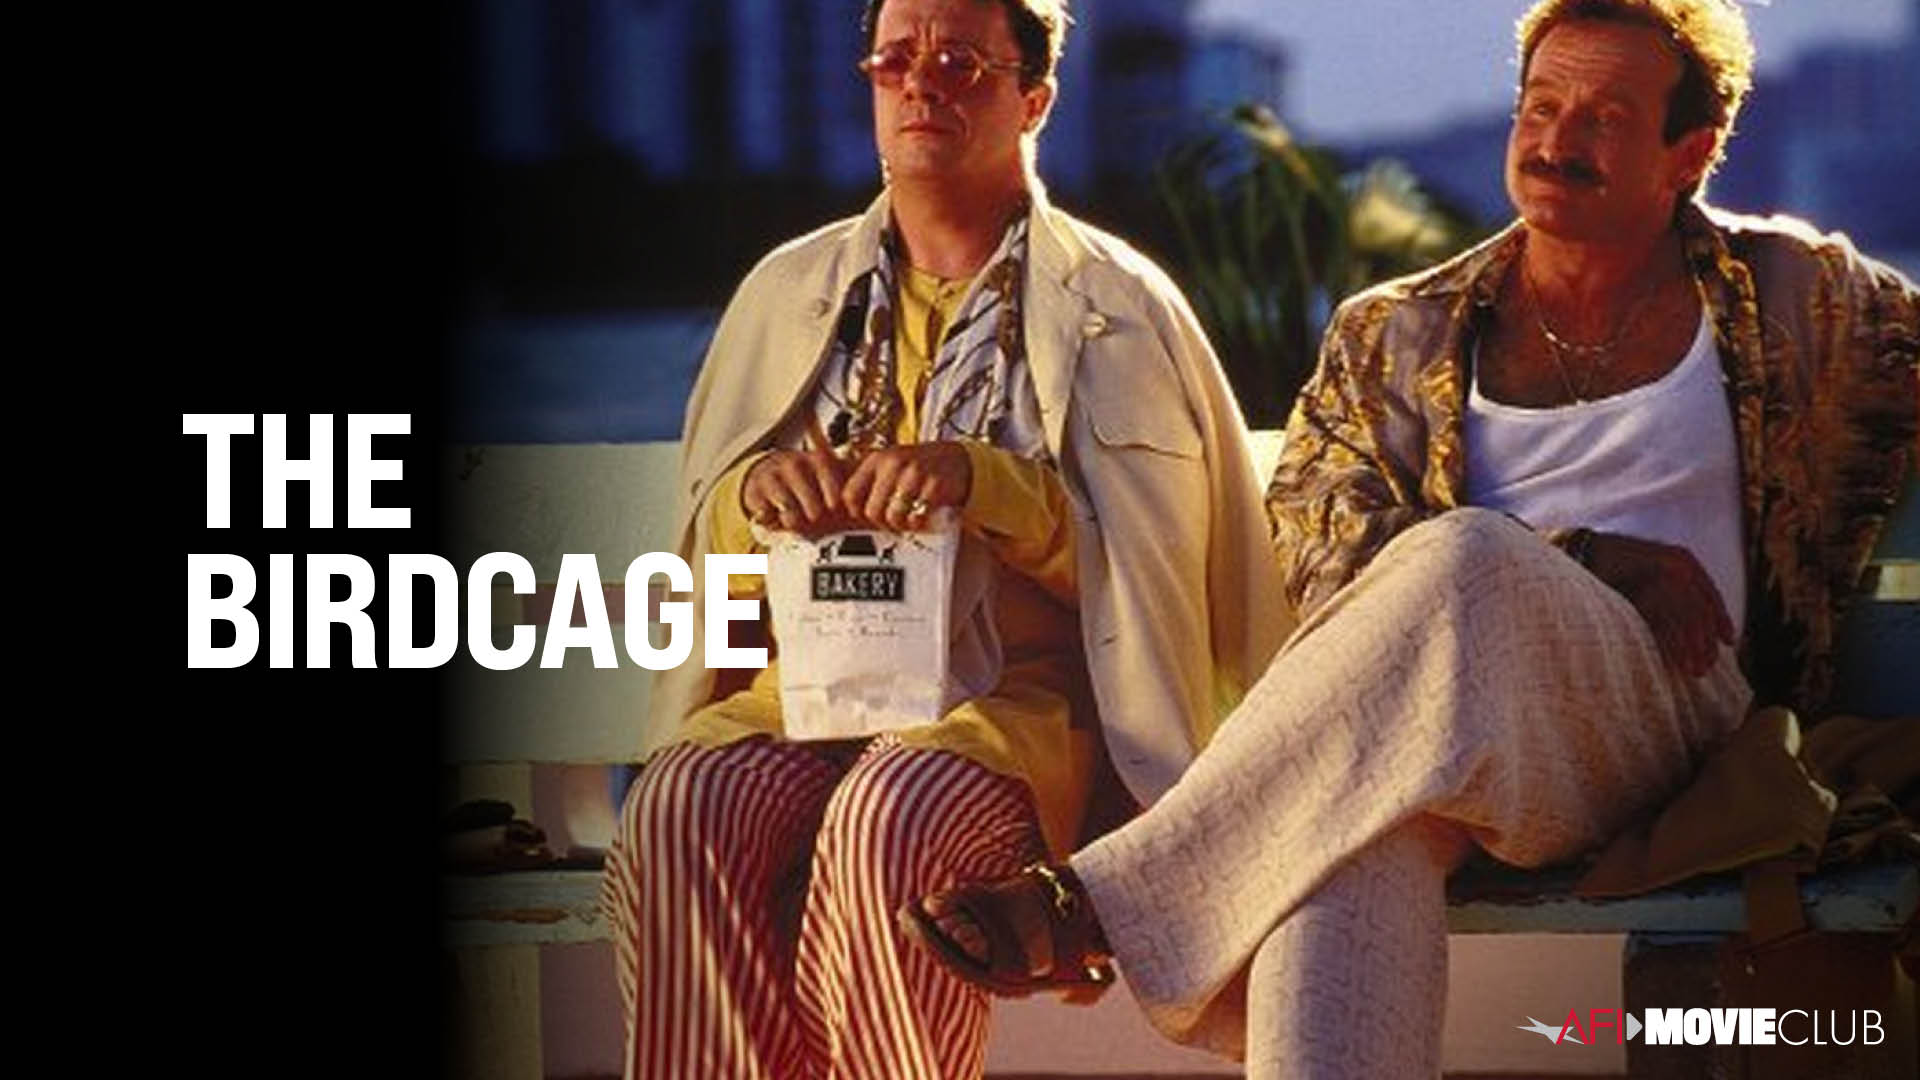 The Birdcage Film Still - Robin Williams and Nathan Lane